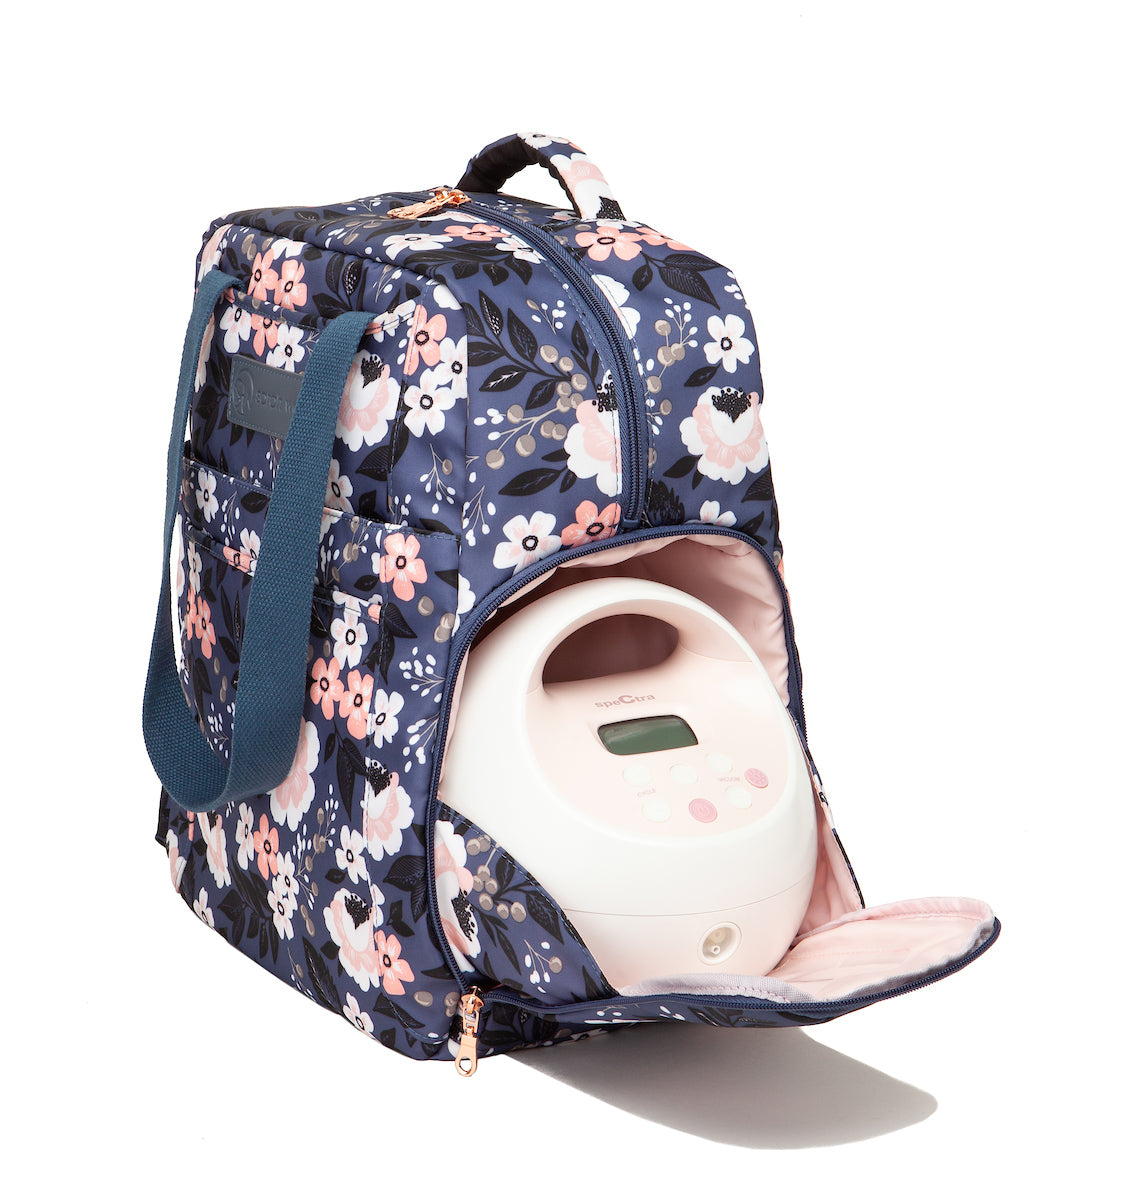 Kelly (Le Floral) / Breast Pump Bags & Accessories from Sarah Wells